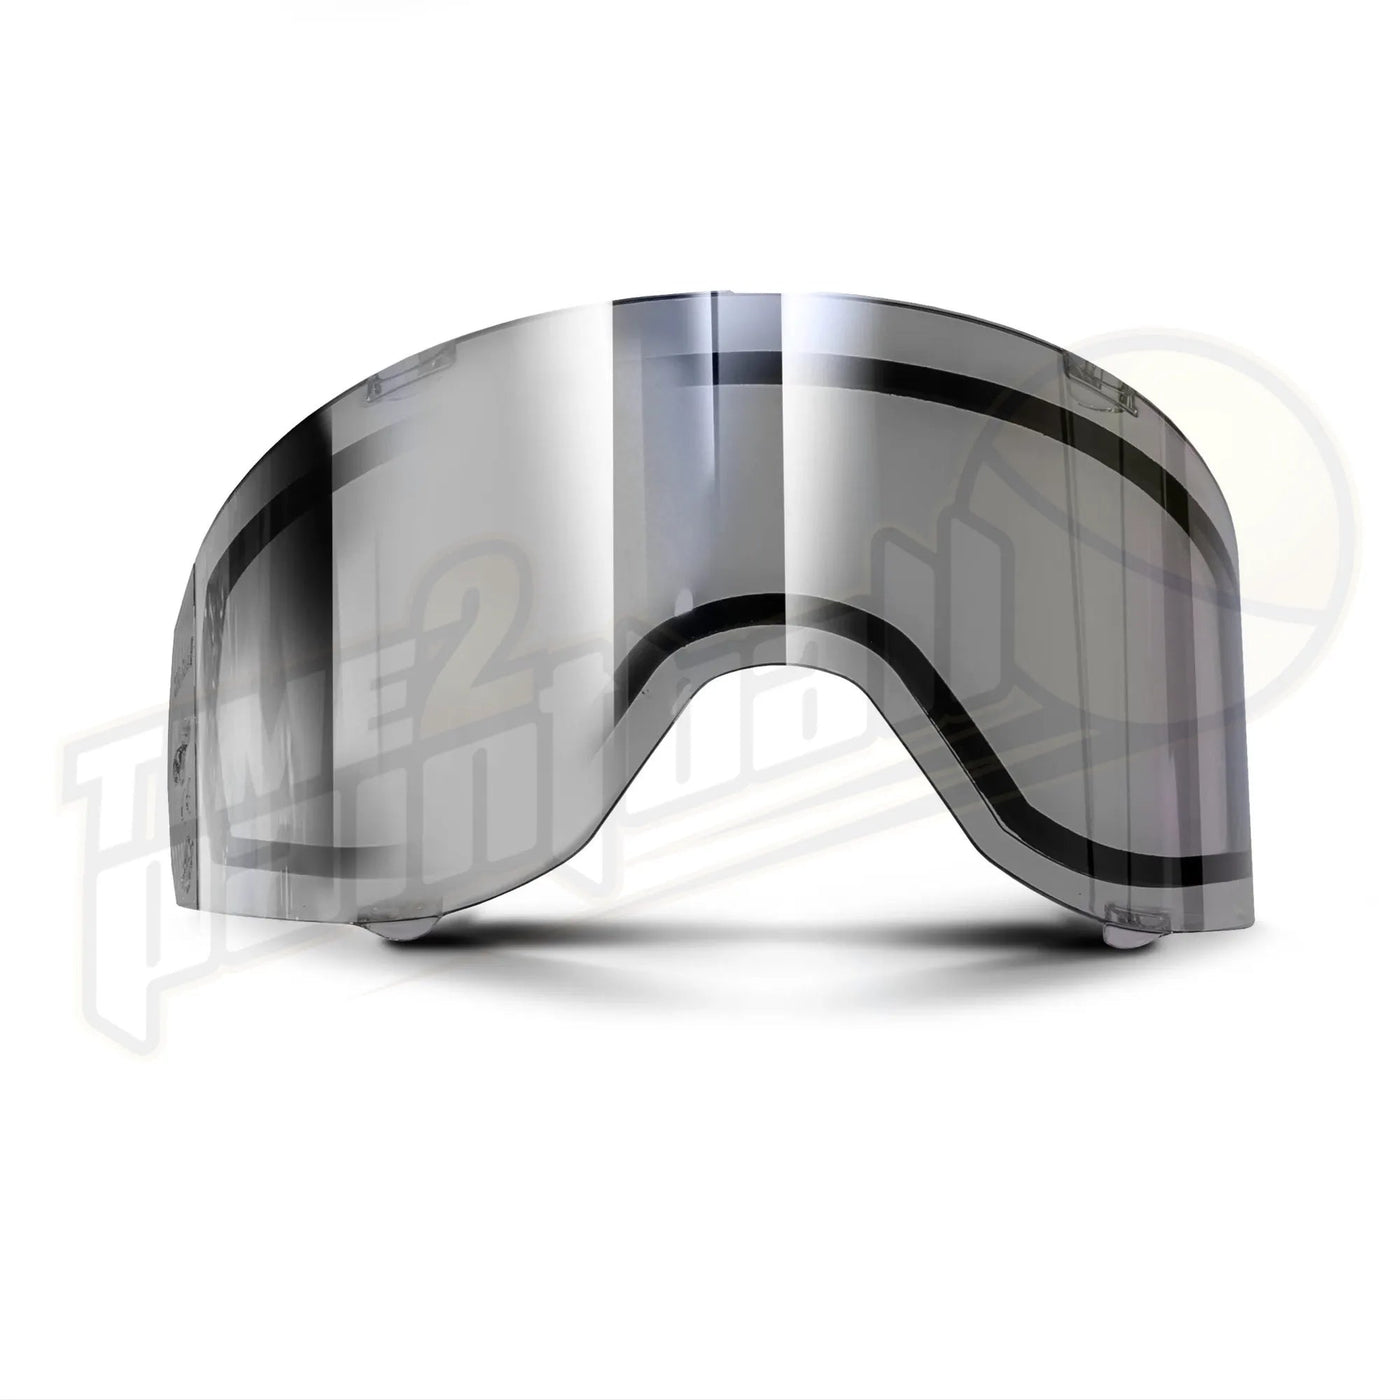 HK Army HSTL Thermal Lens CHROME - Time 2 Paintball